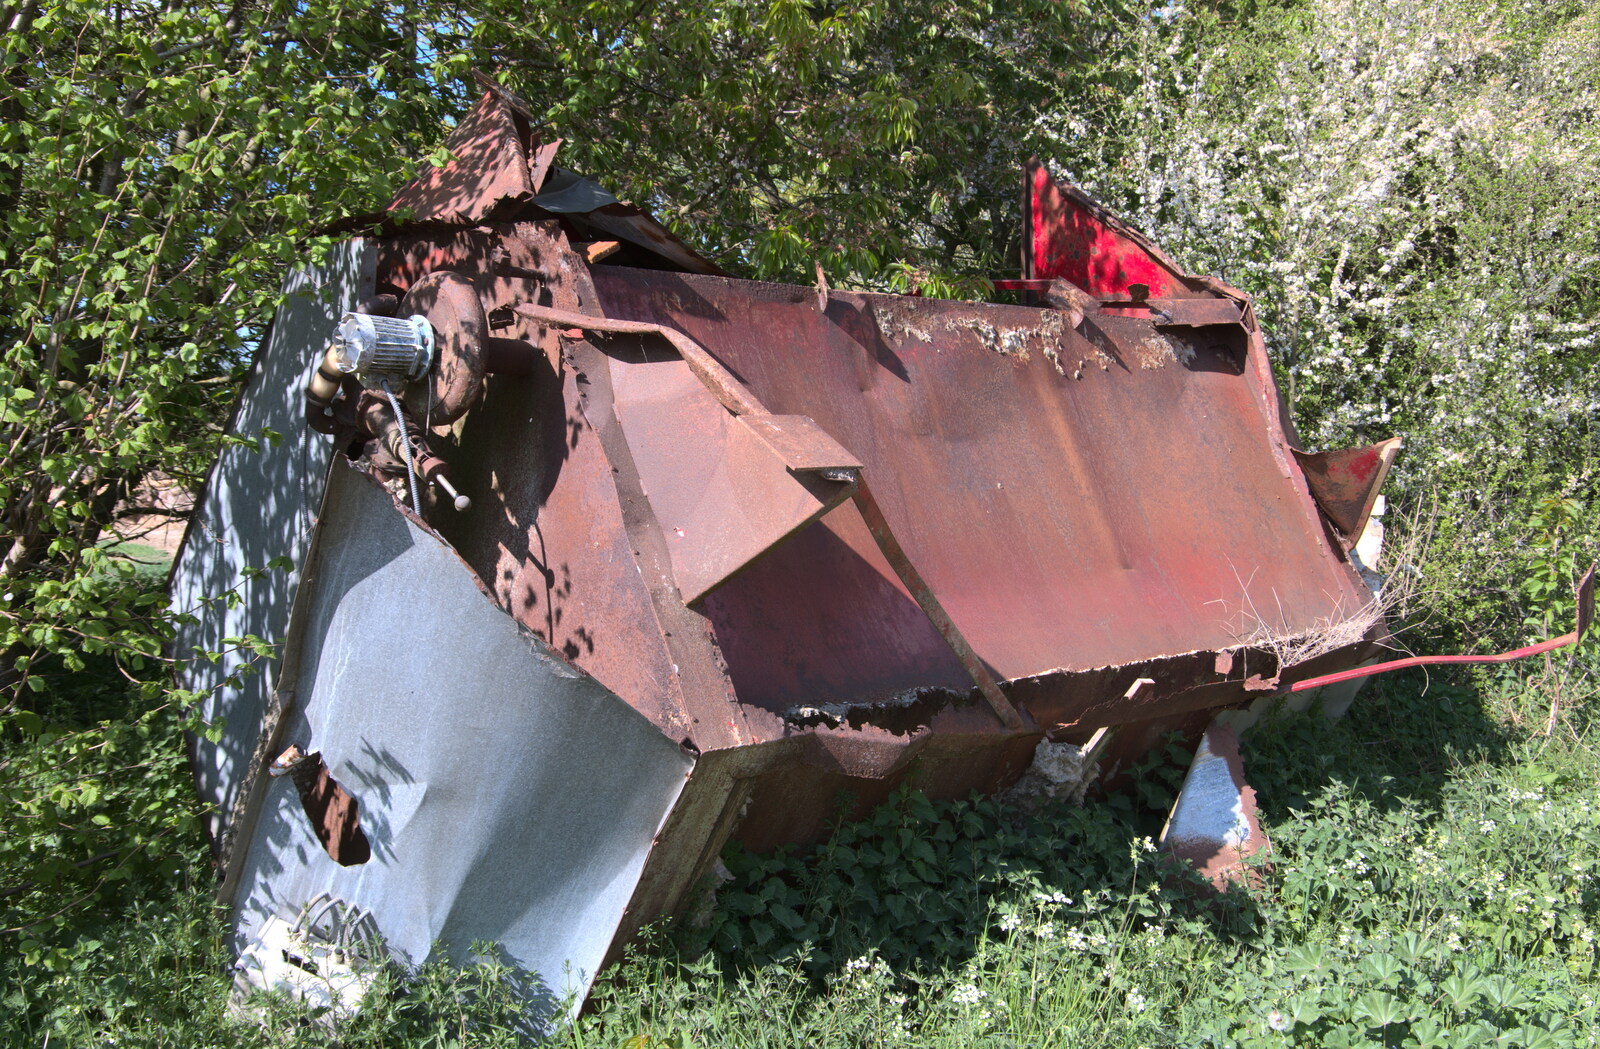 There's a pile of scrap metal in a hedge from Lost Cat and a Walk on Nick's Lane, Brome, Suffolk - 26th April 2020